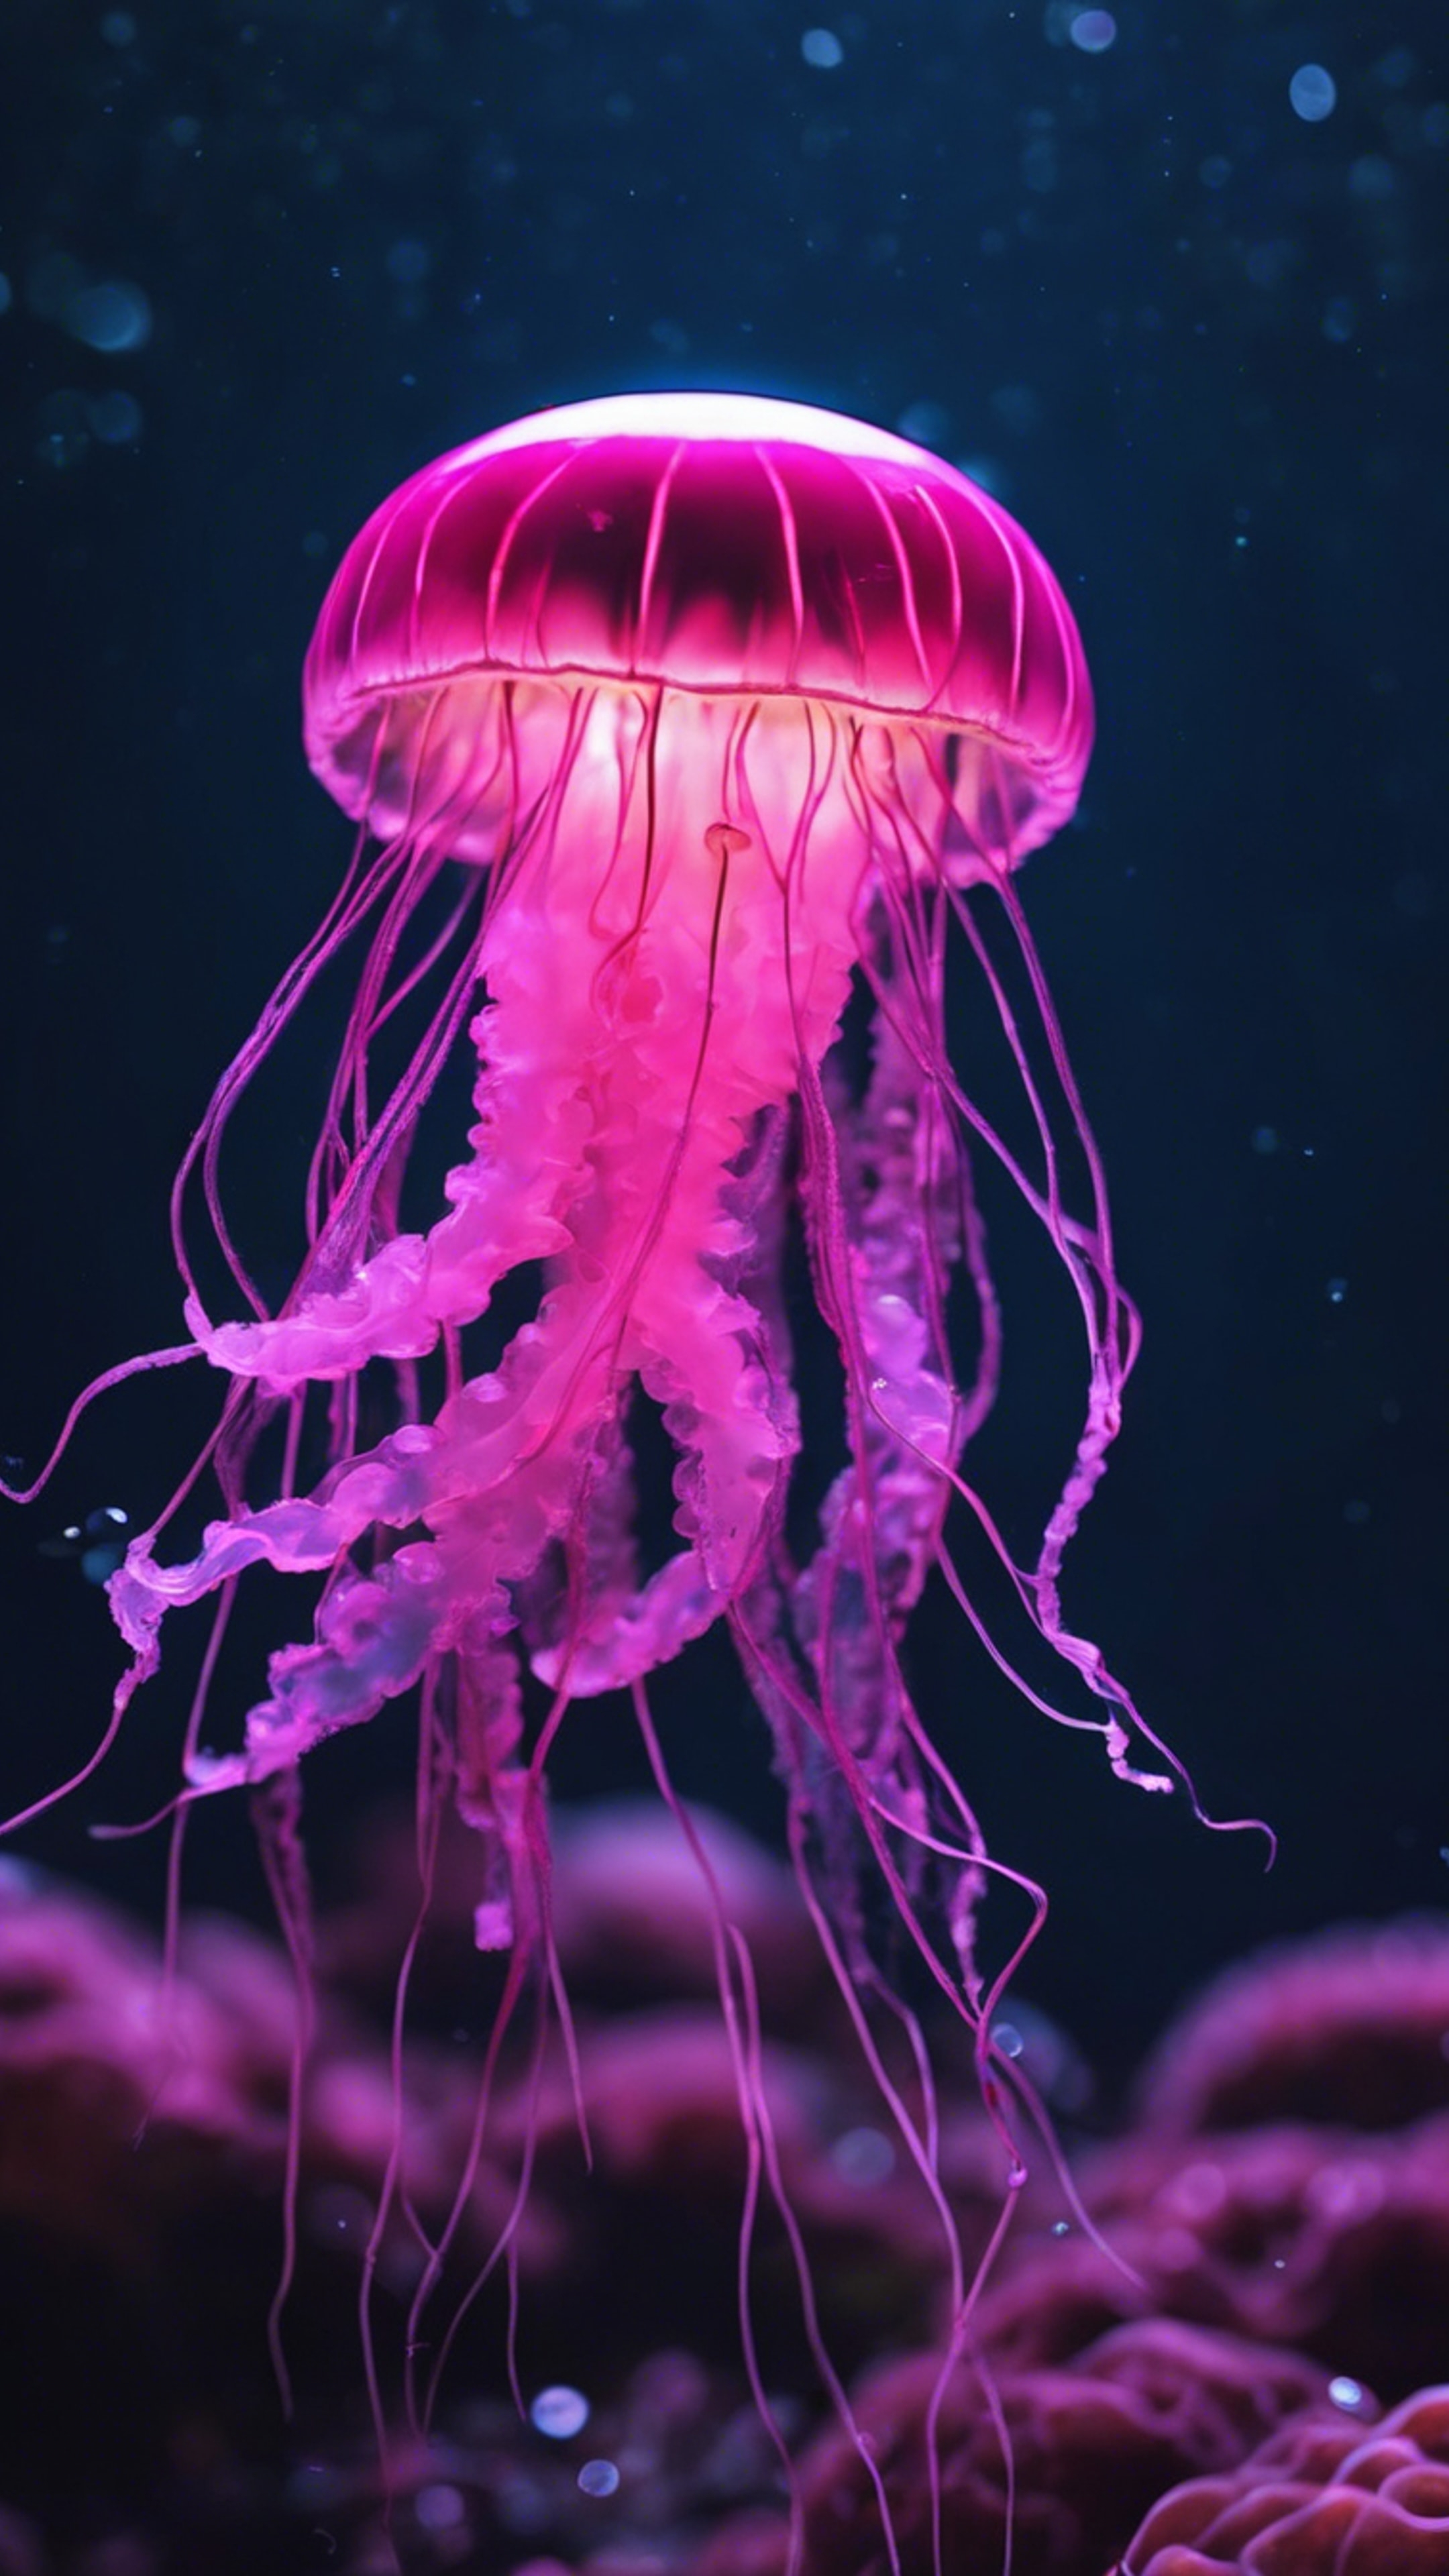 A shimmering neon pink jellyfish calmly floating in the deep sea. Wallpaper[5c6b7f4aae134a3f9d41]